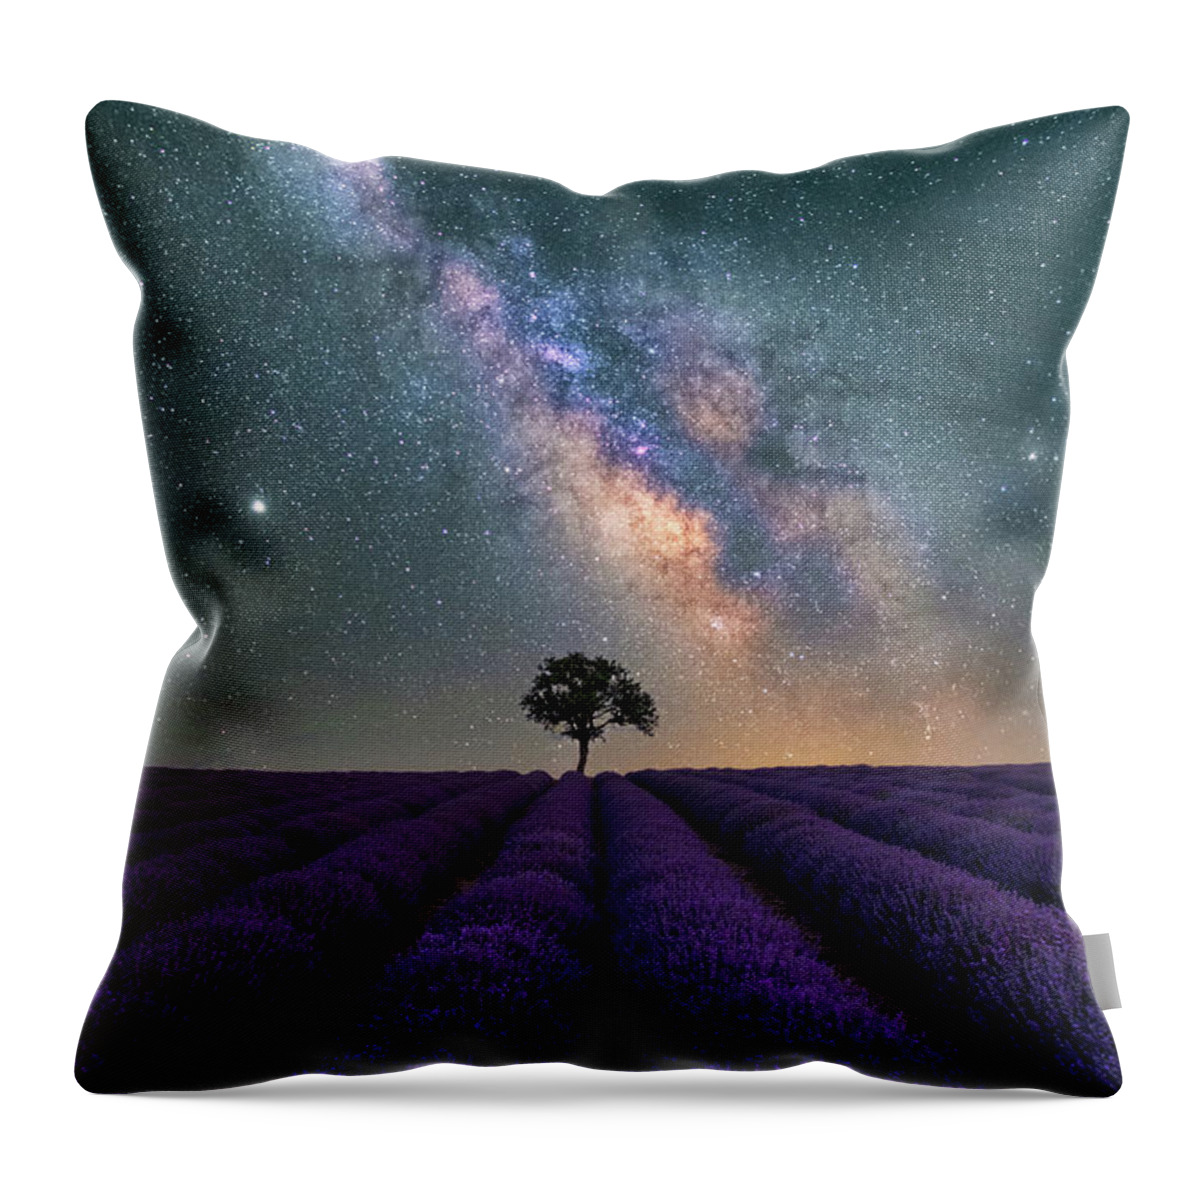 Lavender Throw Pillow featuring the photograph Lonely Tree in a Lavender Field under the Milky Way by Alexios Ntounas